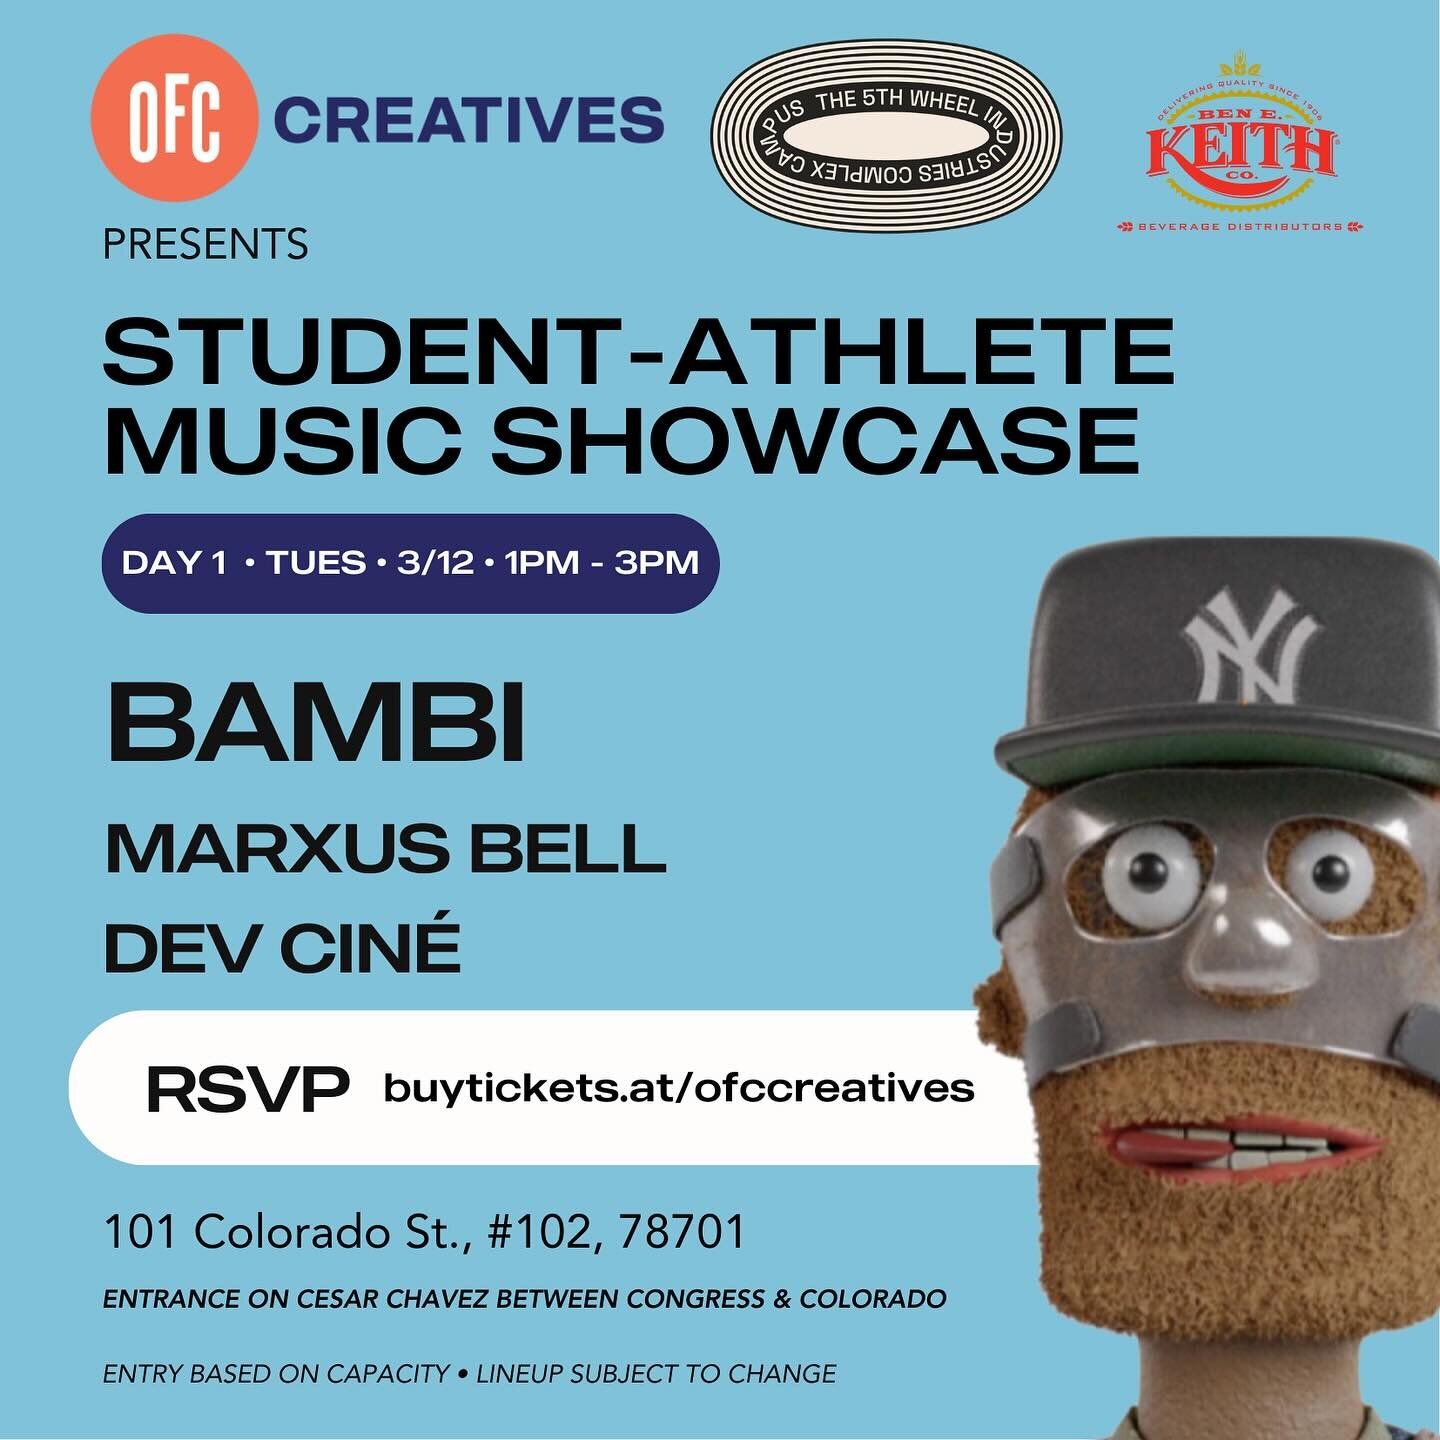 🏀 STUDENT-ATHLETE MUSIC SHOWCASE🏀

Daily schedule, RSVPs are open, 21+ ONLY

Tex-Mex Pale Ale and Ranch Water Seltzer provided by our friends @benekeithbevs 

**ENTRY BASED ON CAPACITY** LINEUP SUBJECT TO CHANGE**